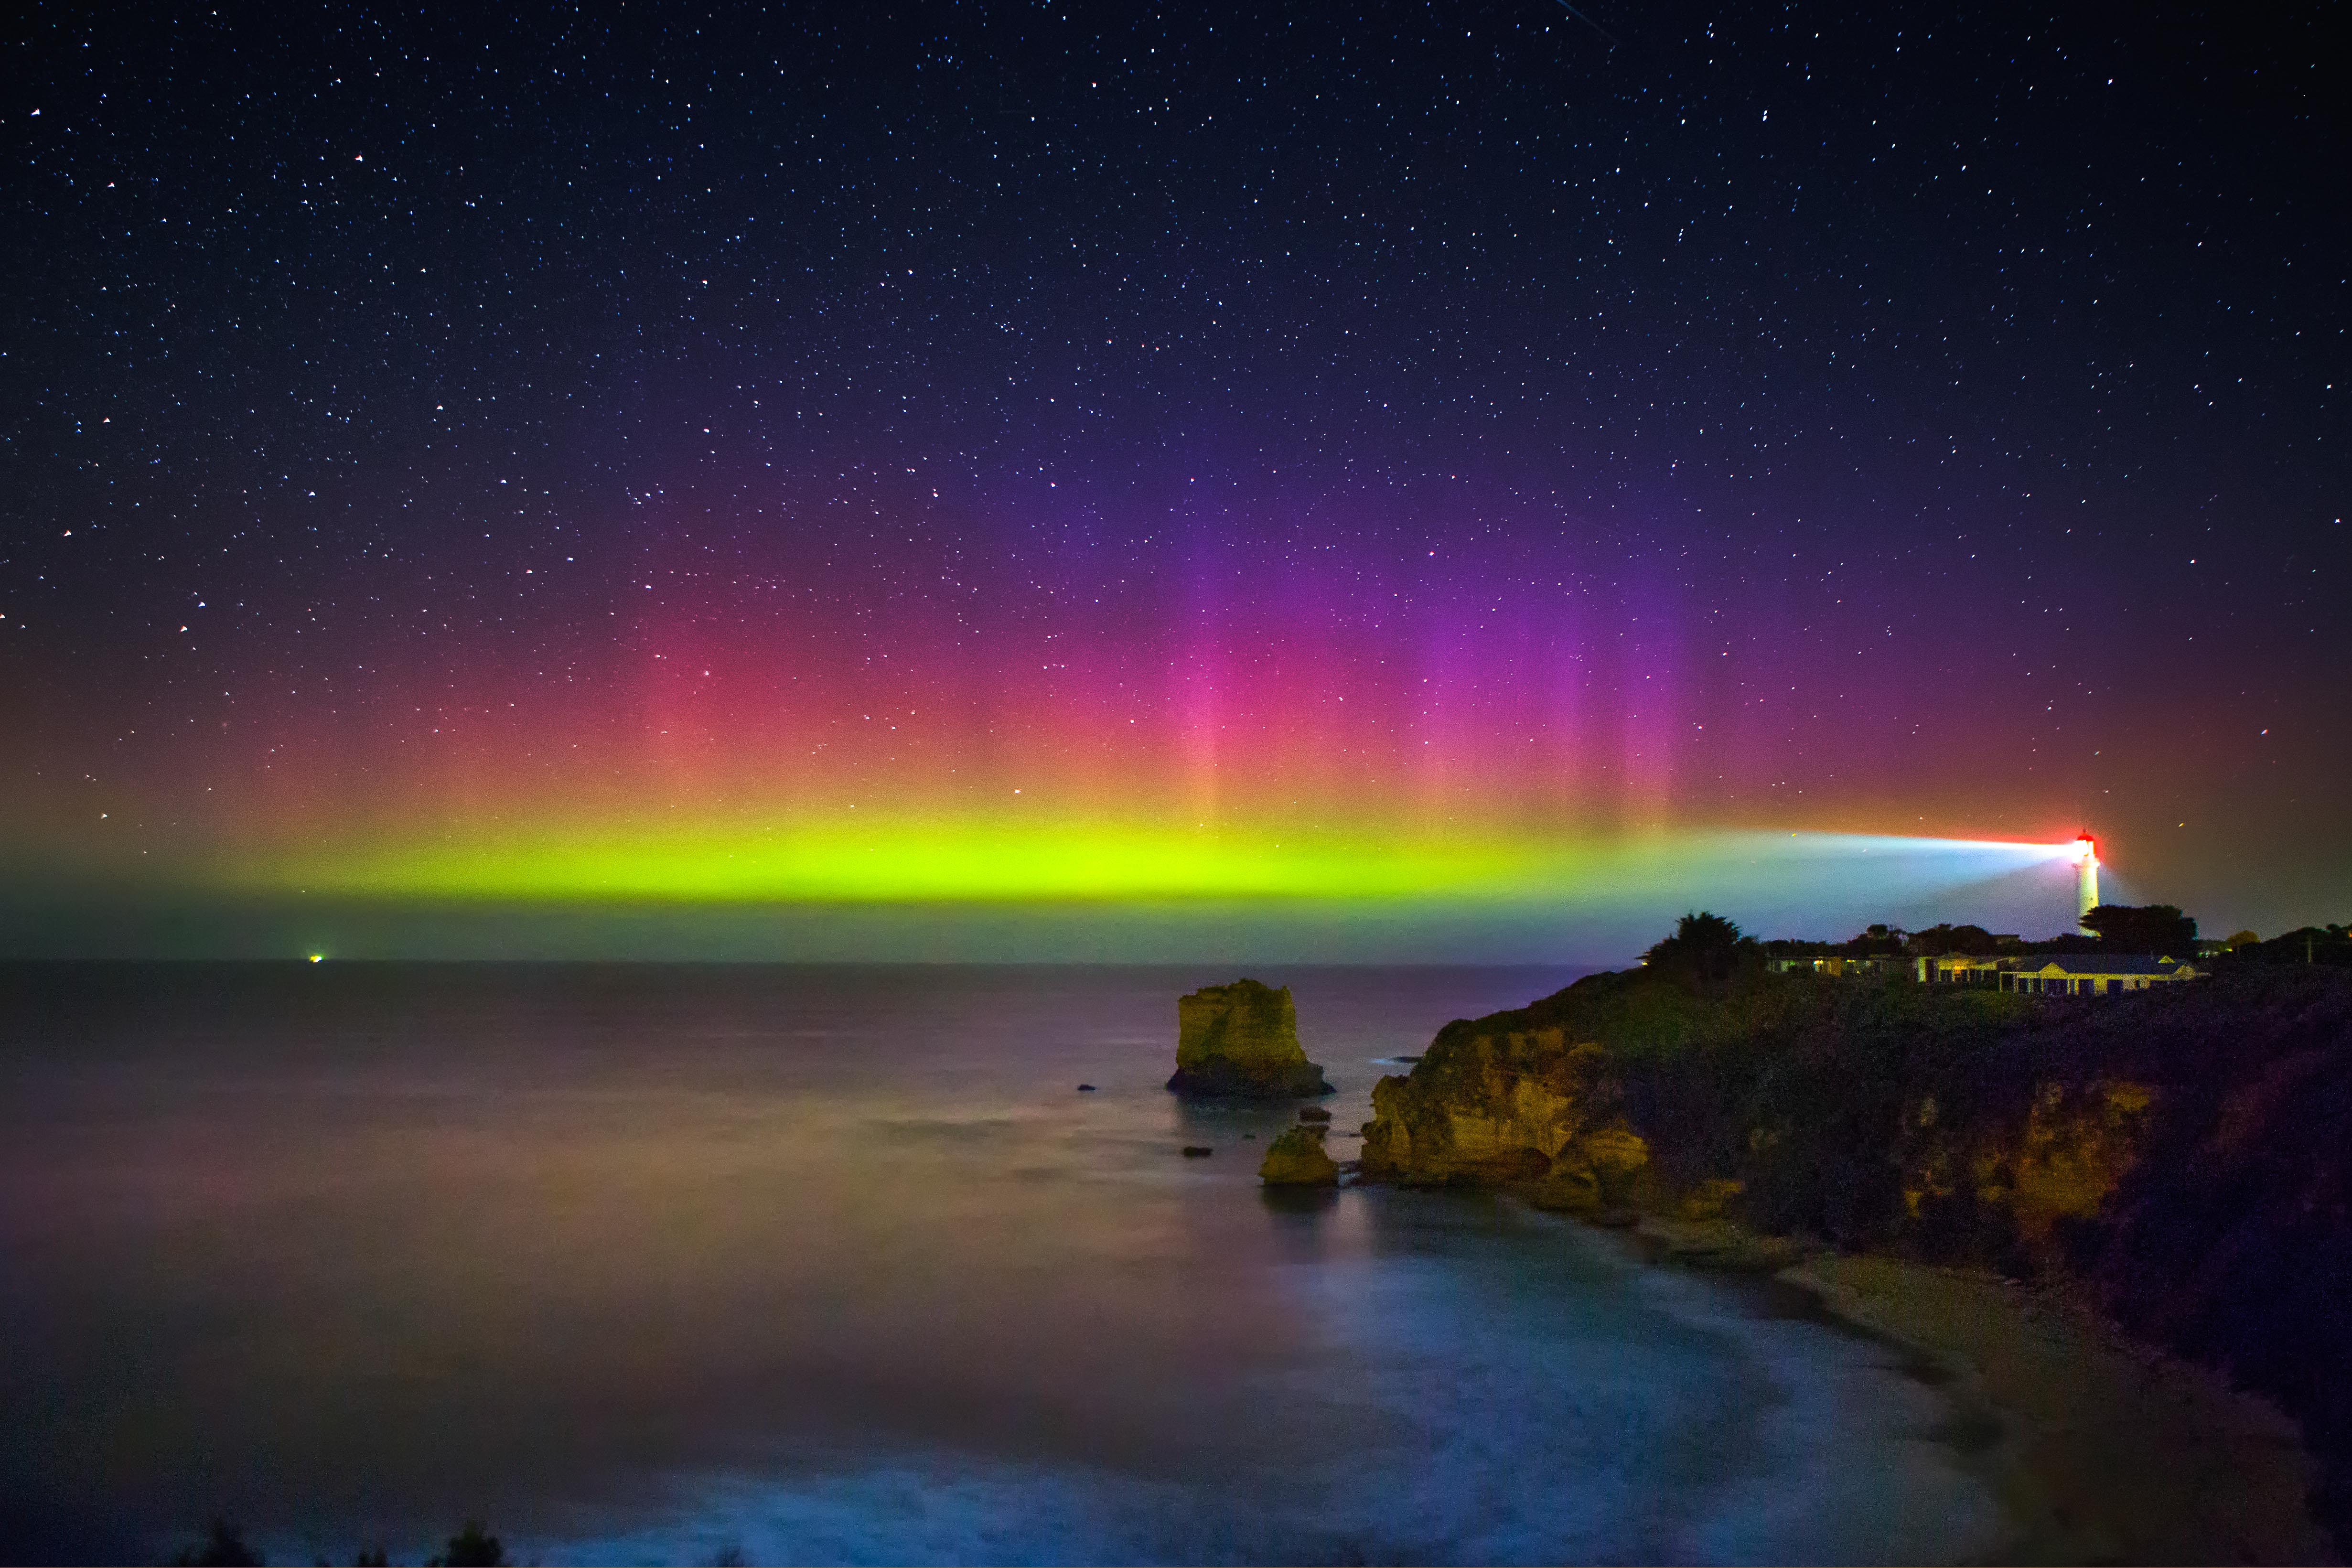 Image: The aurora australis at Aireys Inlet, Victoria on 28 March 2017. Credit: Lachlan Manley Photography